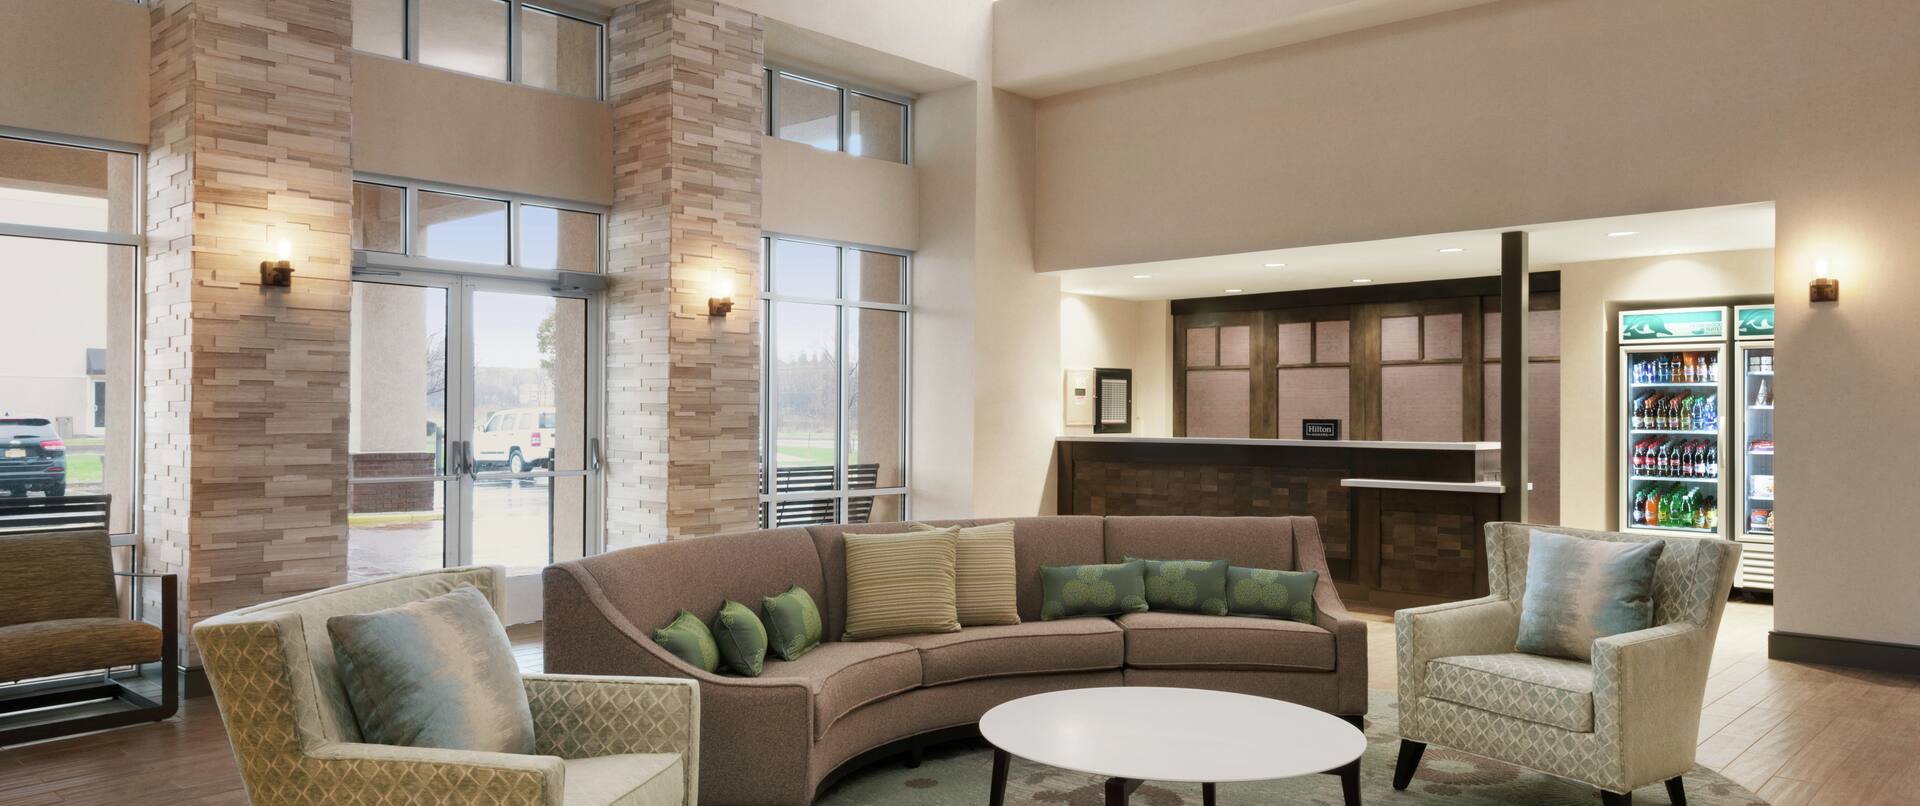 Front Desk Lobby with Lounge Seating Area